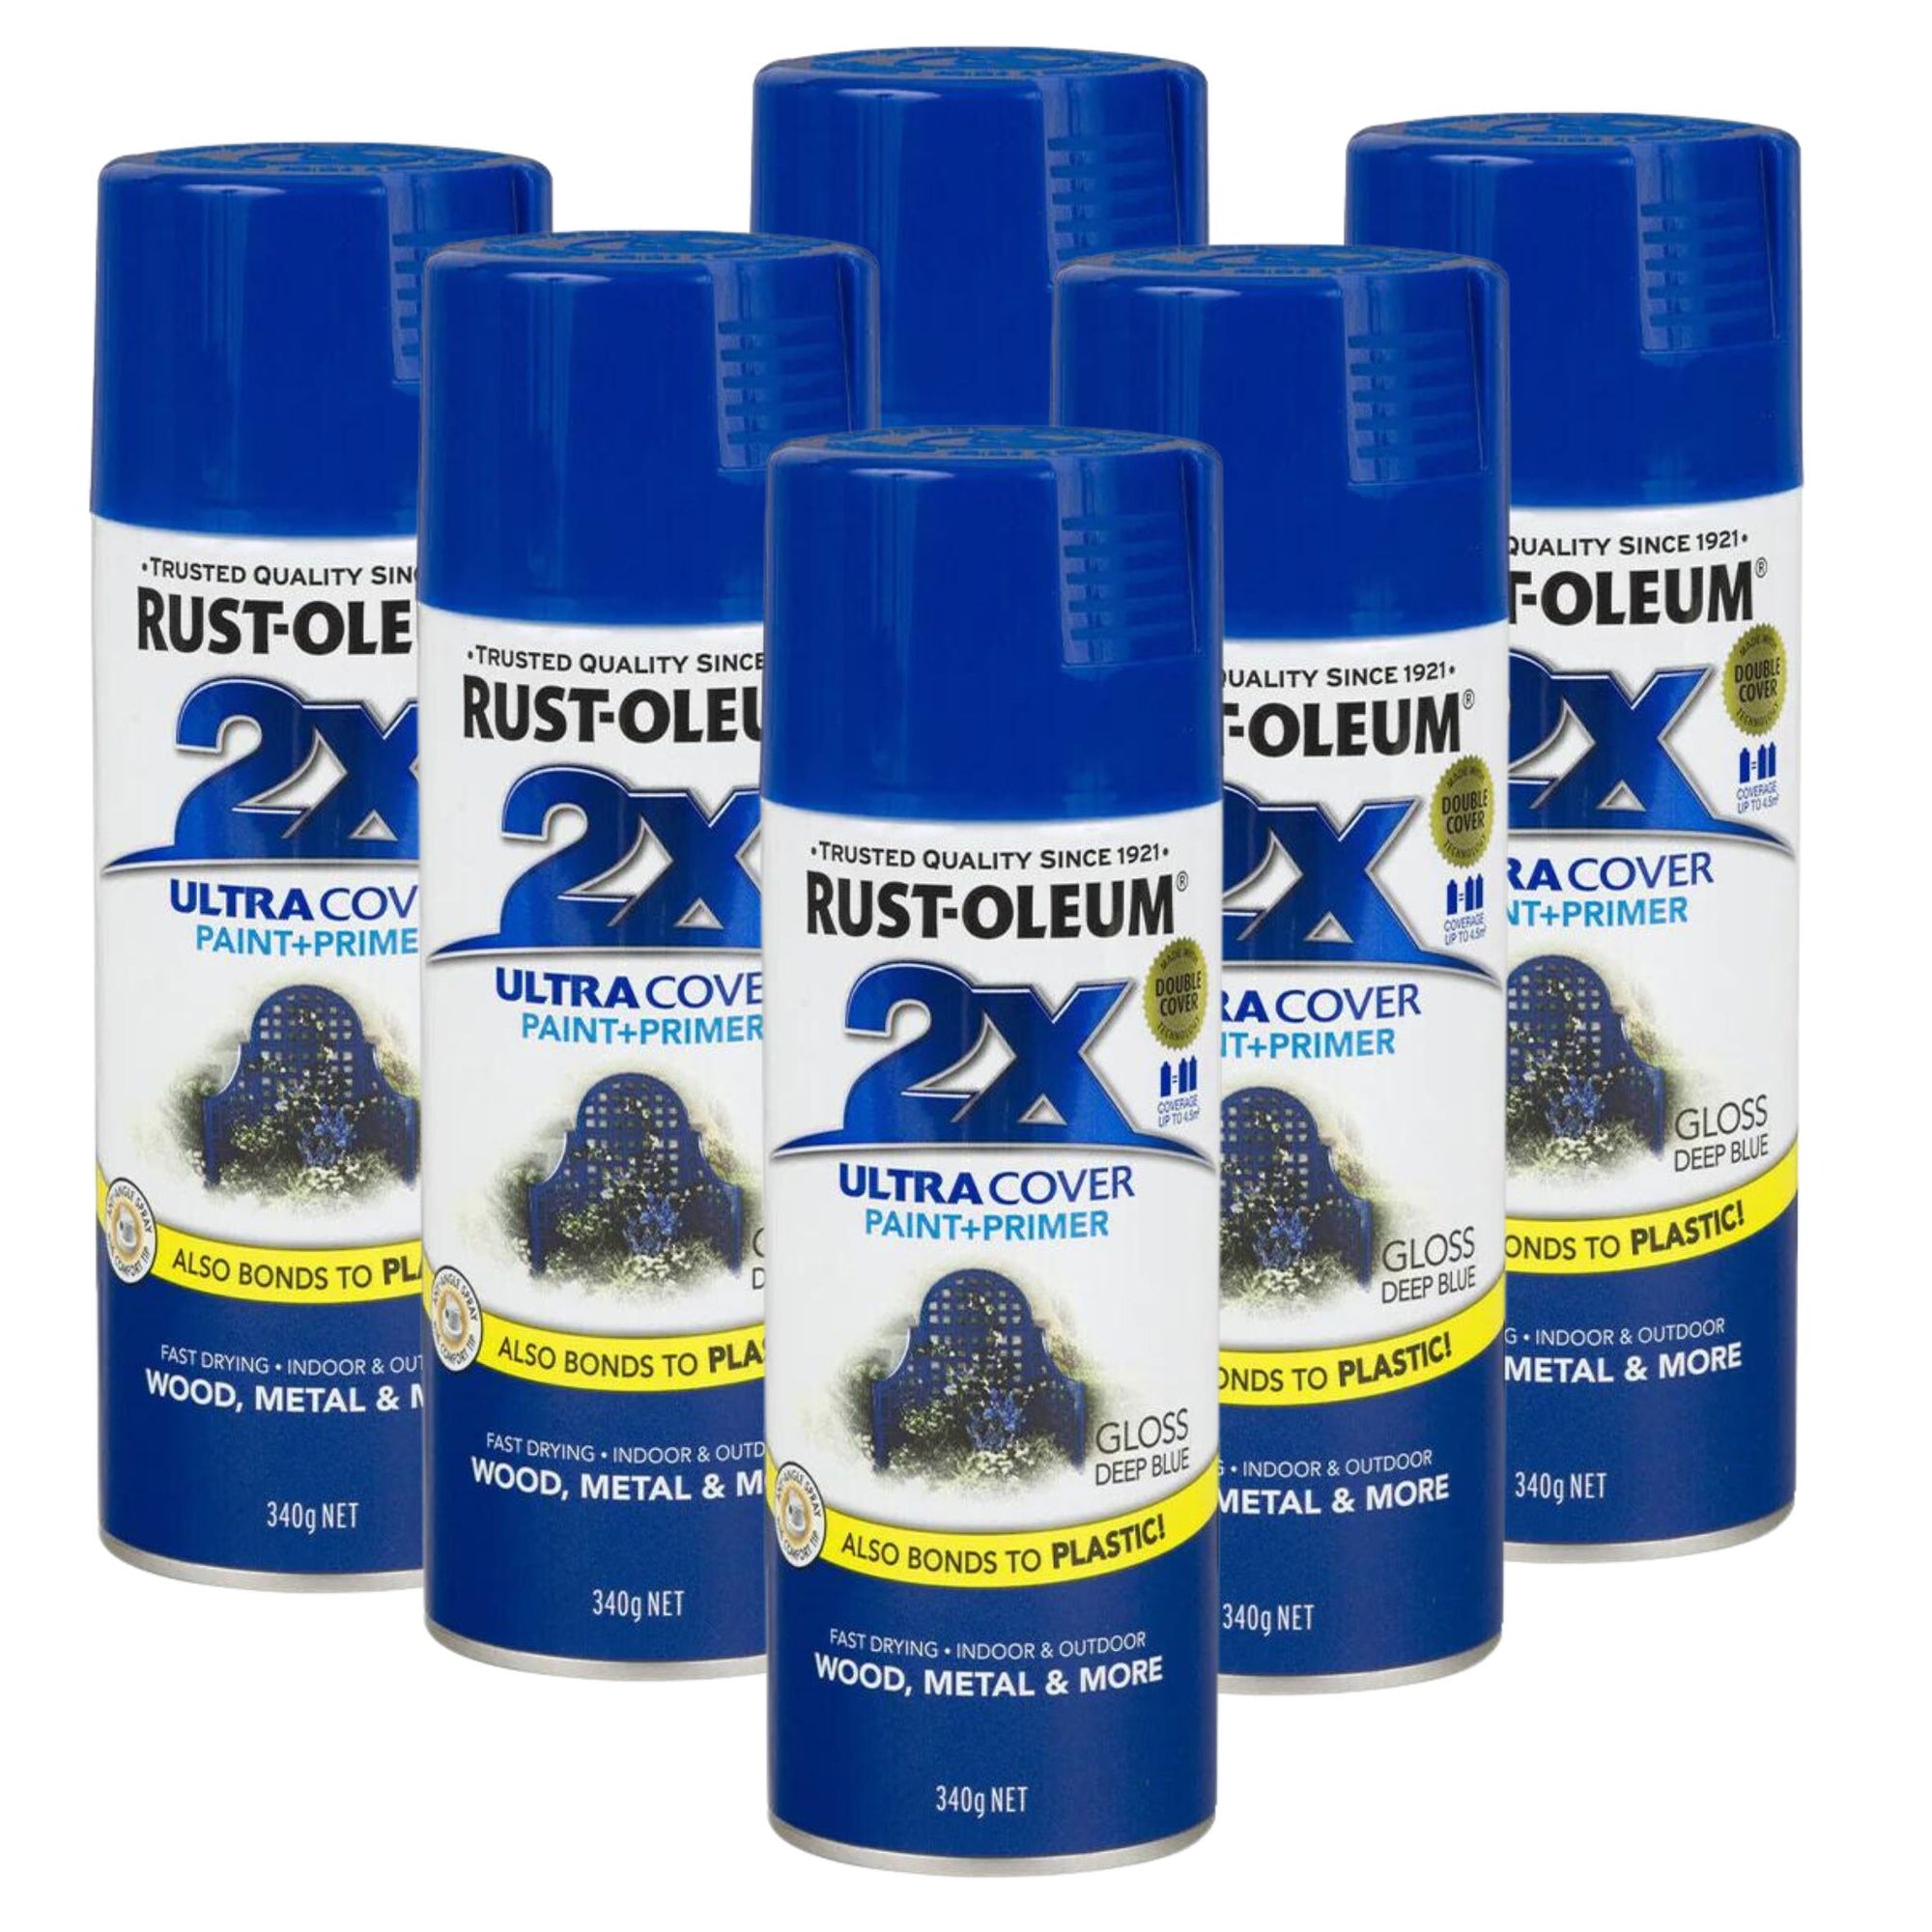 RUST-OLEUM 2X Gloss Paint & Primer Spray Paint 340g Deep Blue 276266 | Pack of 6 - South East Clearance Centre